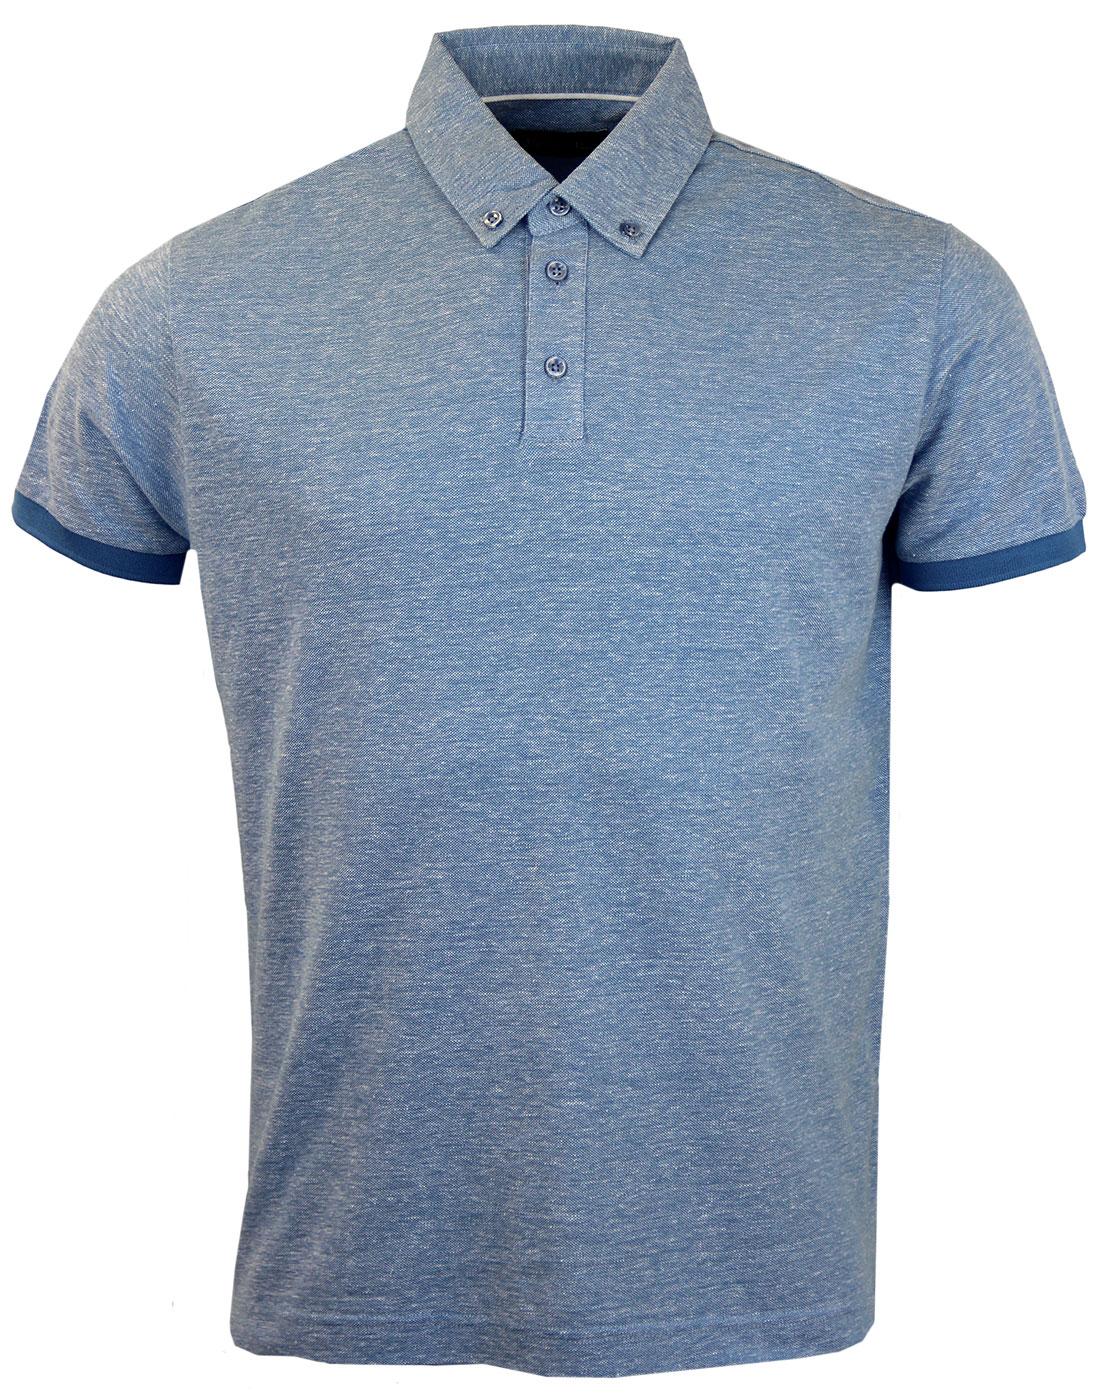 ALAN PAINE Conway Retro Mod Button Down Tailored Polo Mid Blue